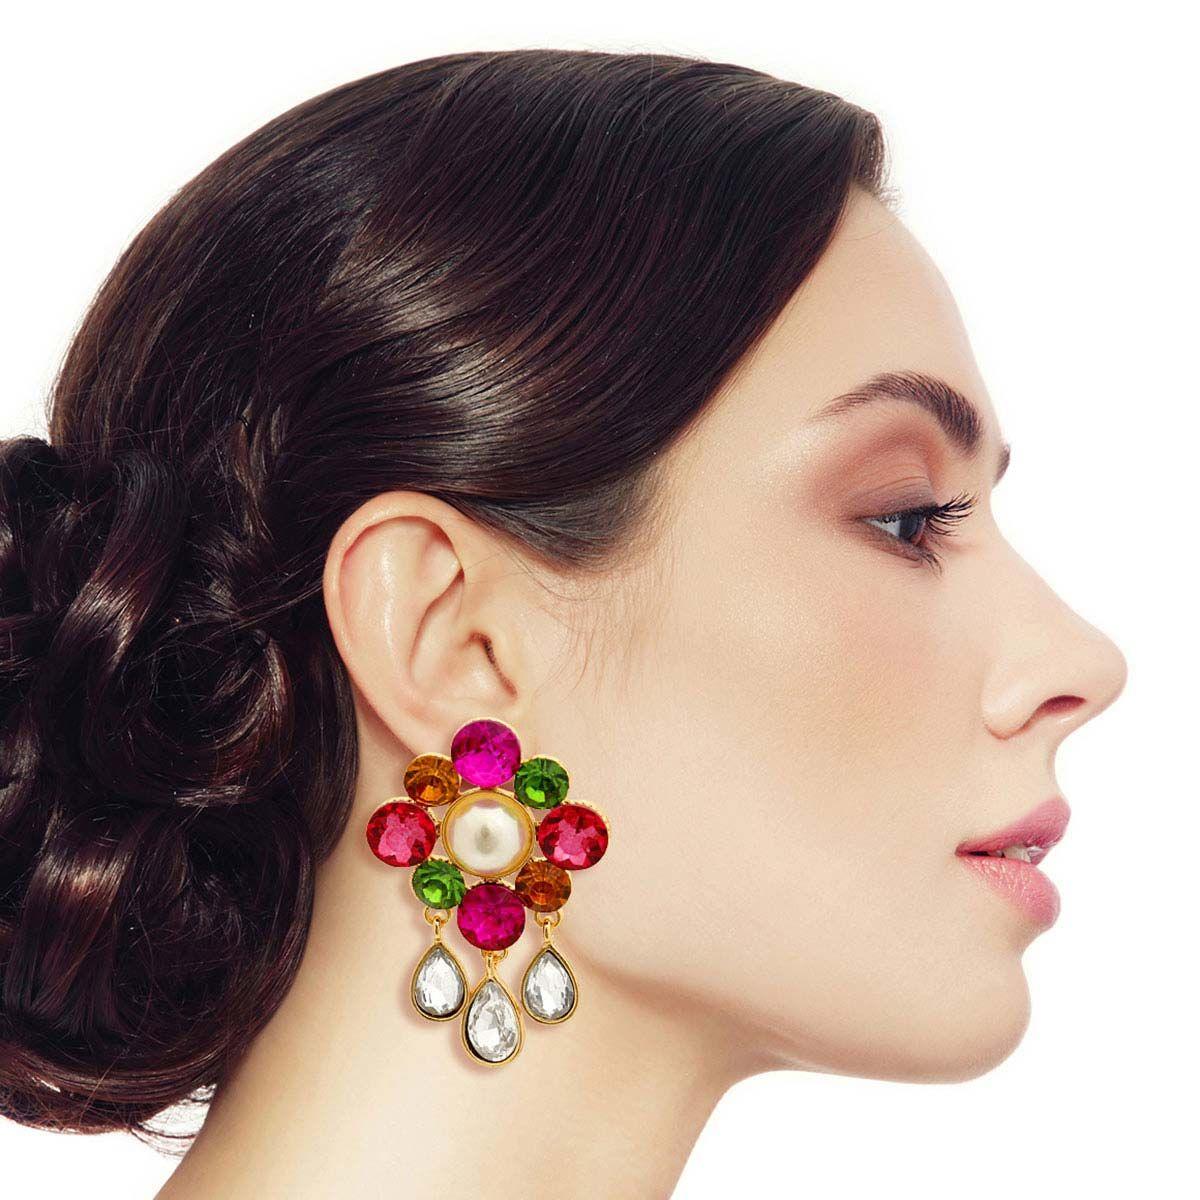 Stunning Multicolor Stud Flower Clear Droplet Earrings That Will Make You Shine